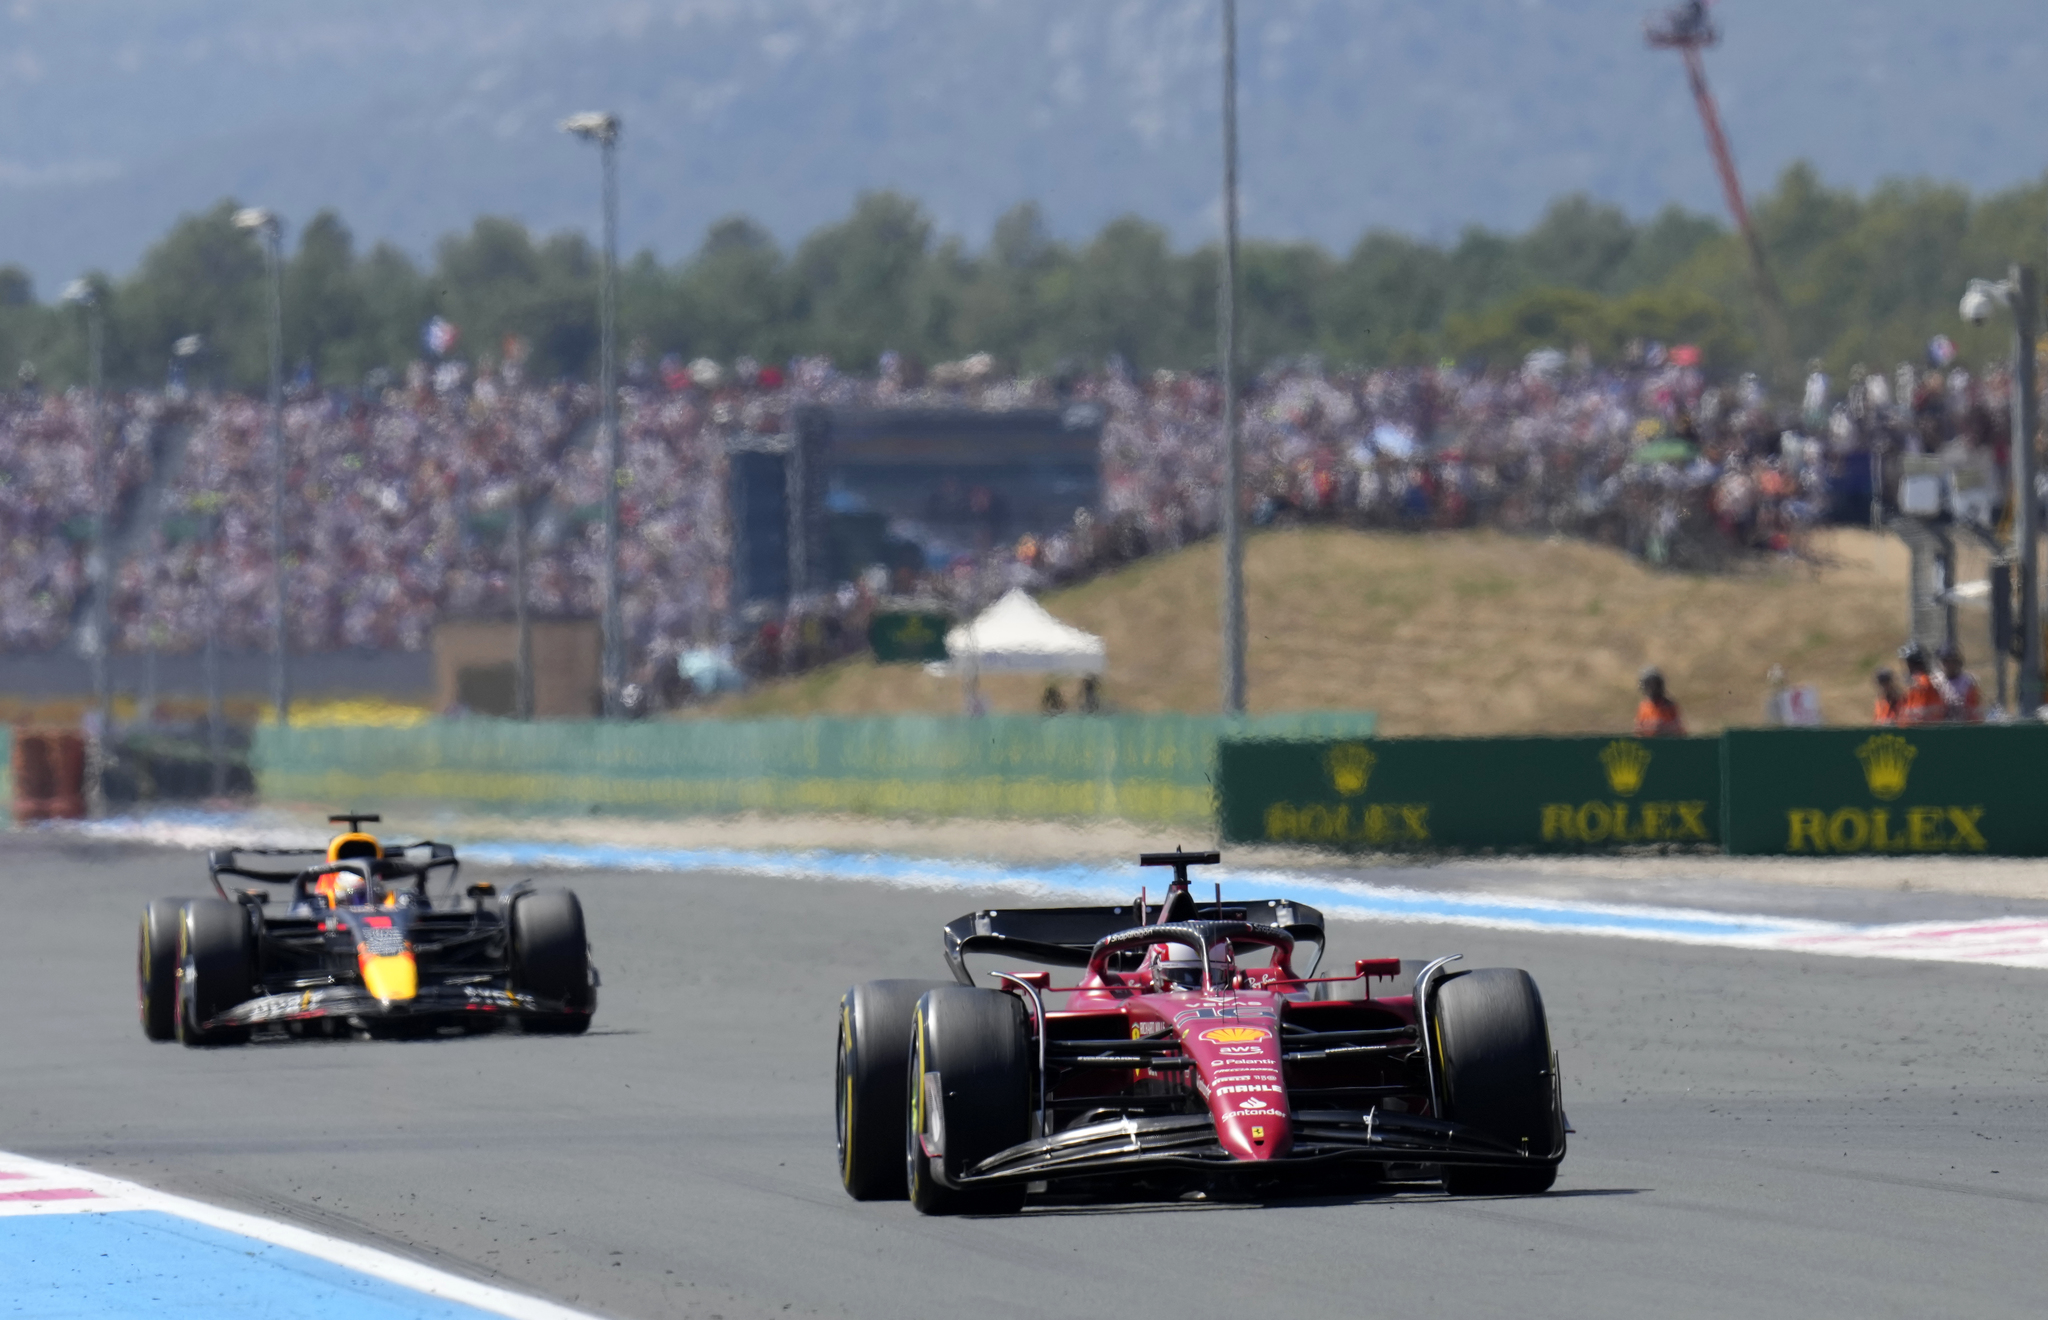  lt;HIT gt;Ferrari lt;/HIT gt; driver Charles Leclerc of Monaco steers his car followed by Red Bull driver Max Verstappen of the Netherlands during the French Formula One Grand Prix at Paul Ricard racetrack in Le Castellet, southern France, Sunday, July 24, 2022. (AP Photo/Manu Fernandez)